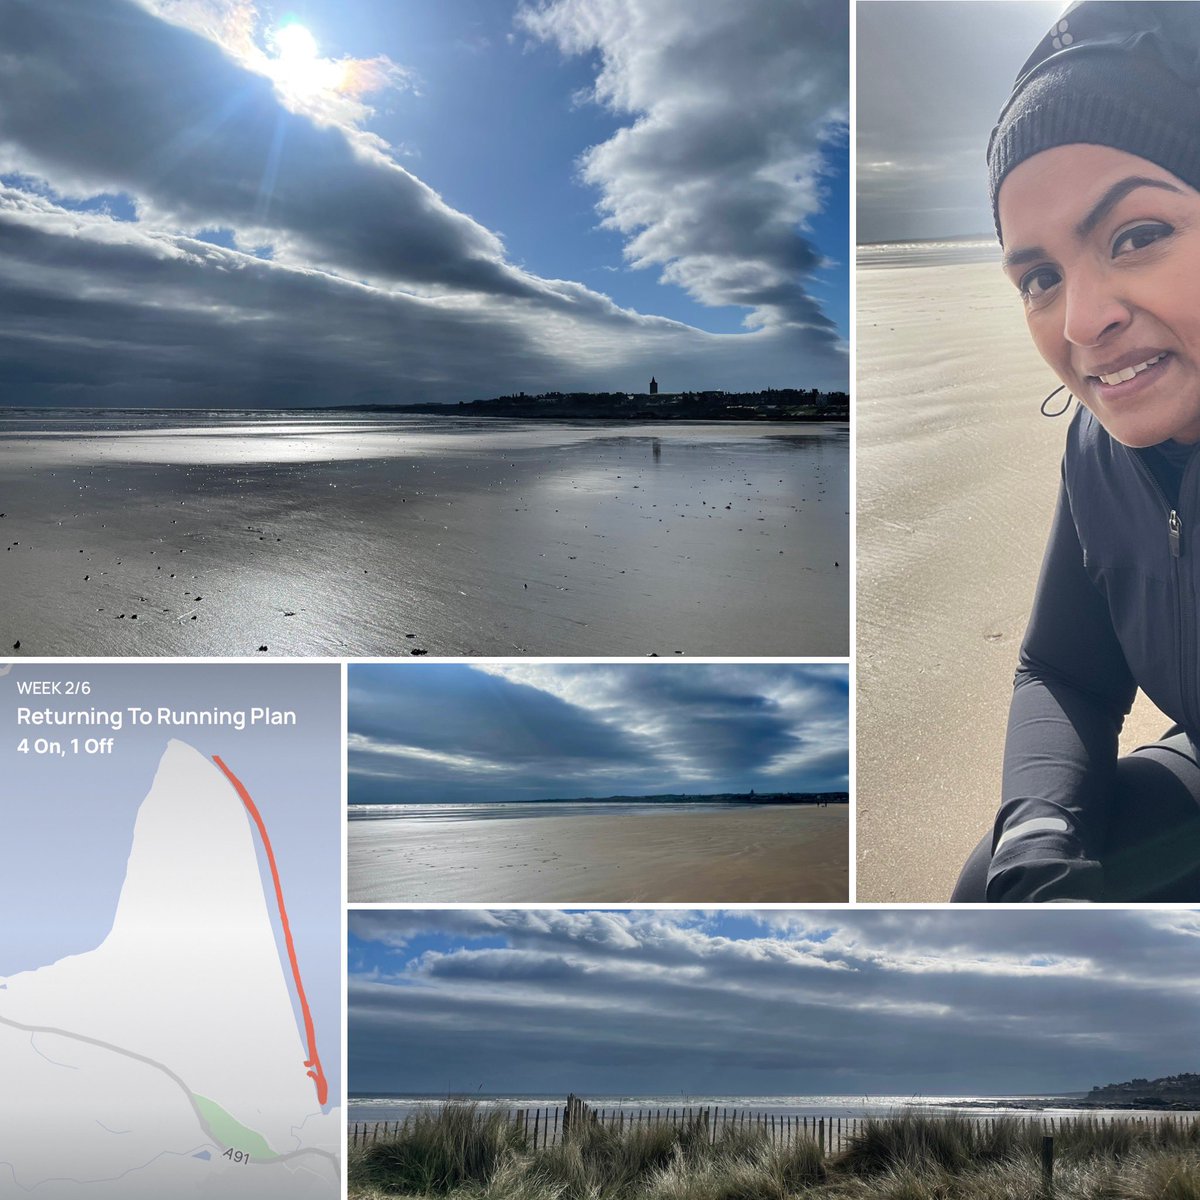 A beach walk run with #runnacoach today. Week 2 of a return to run programme. It was tough, my legs felt heavy! It was also very windy. The hardest part was getting out of car! Once out, I just did it & felt amazing afterwards. Love that beach 💙🌊 #running @sweatybetty